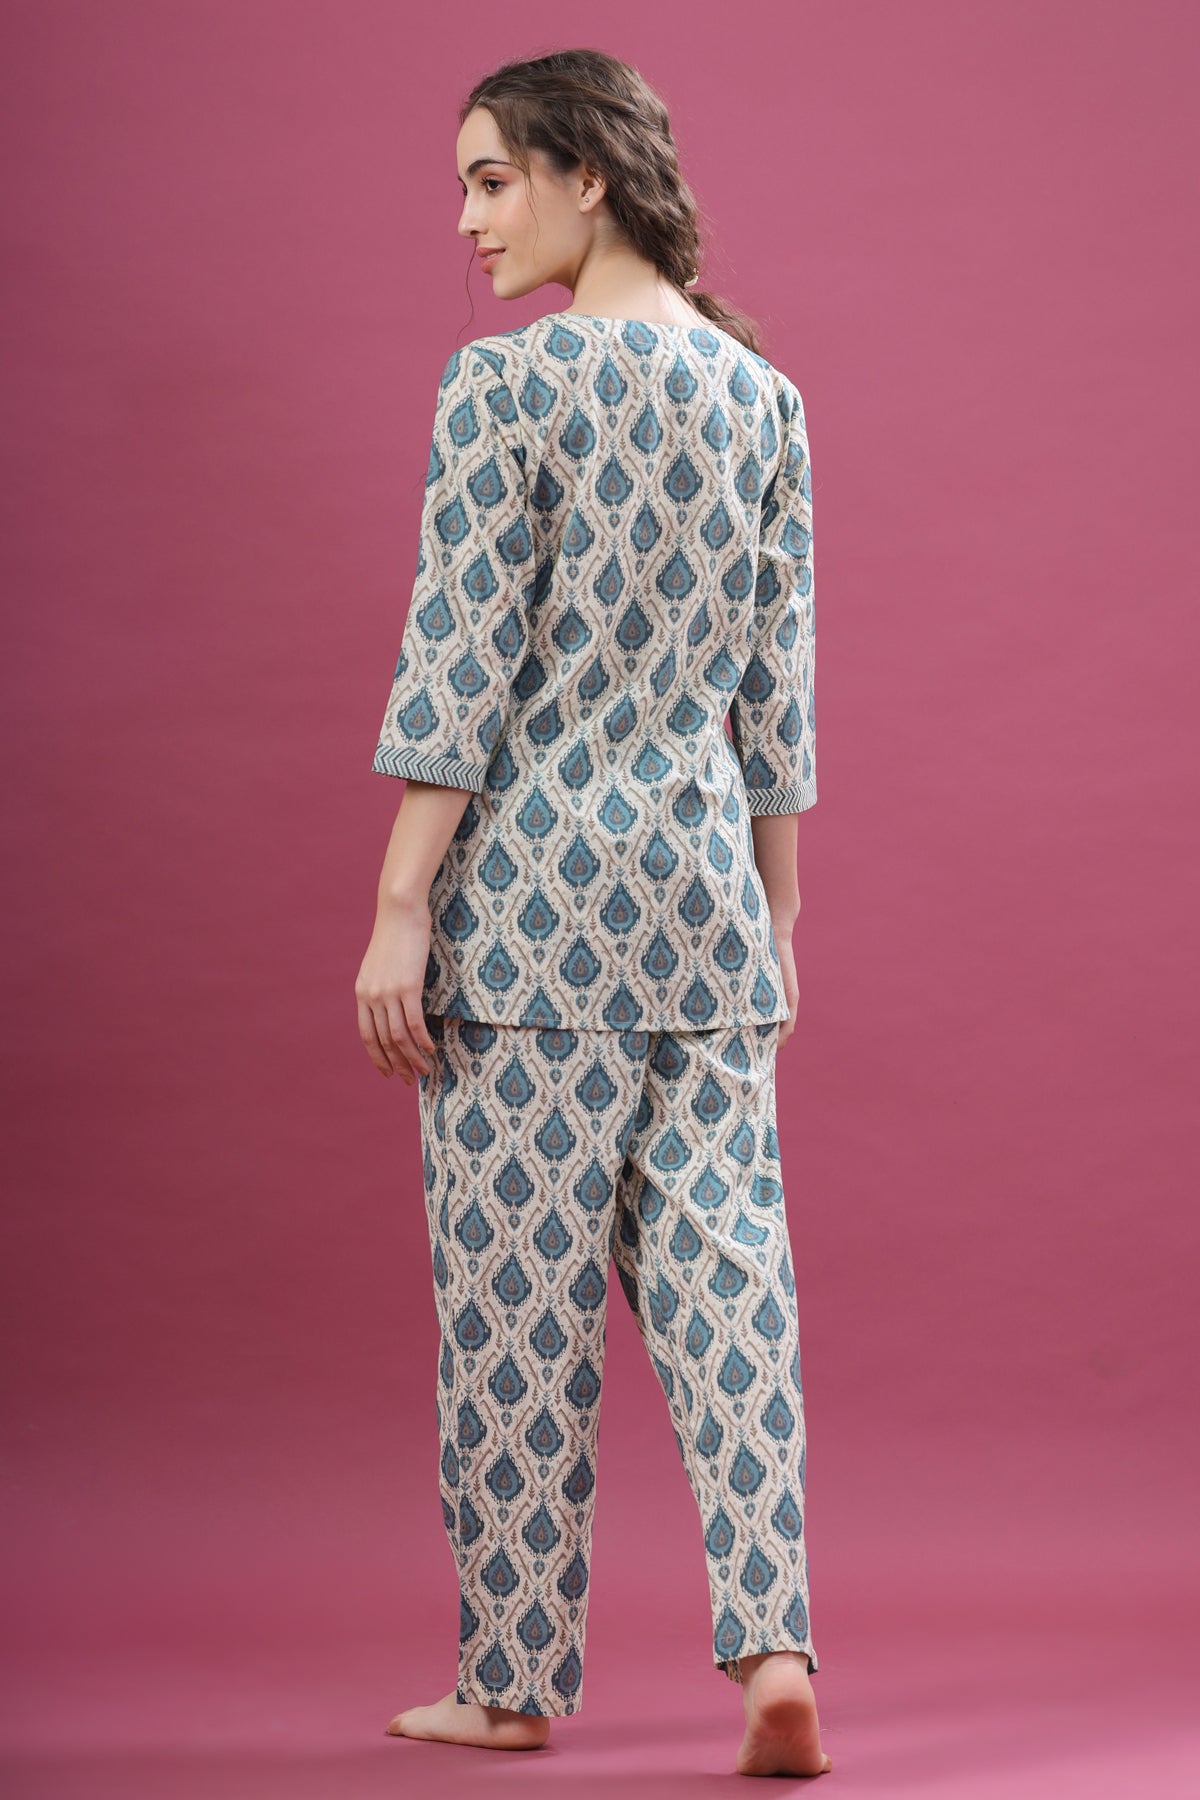 Traditional Motif on Off-white Loungewear